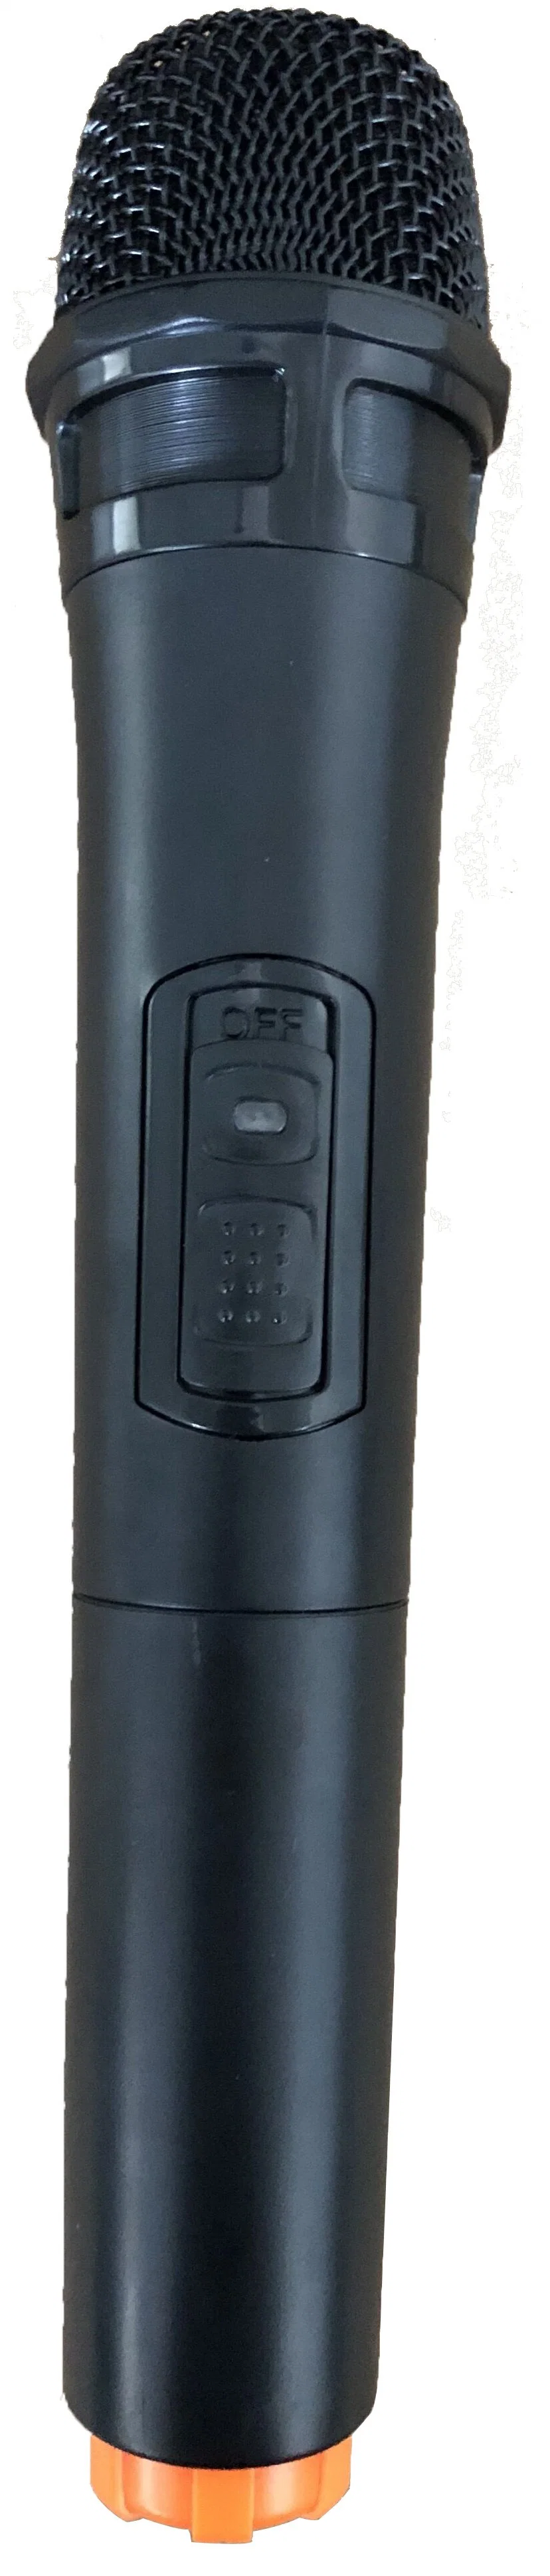 DSP Digital Wired Music Voice Microphone